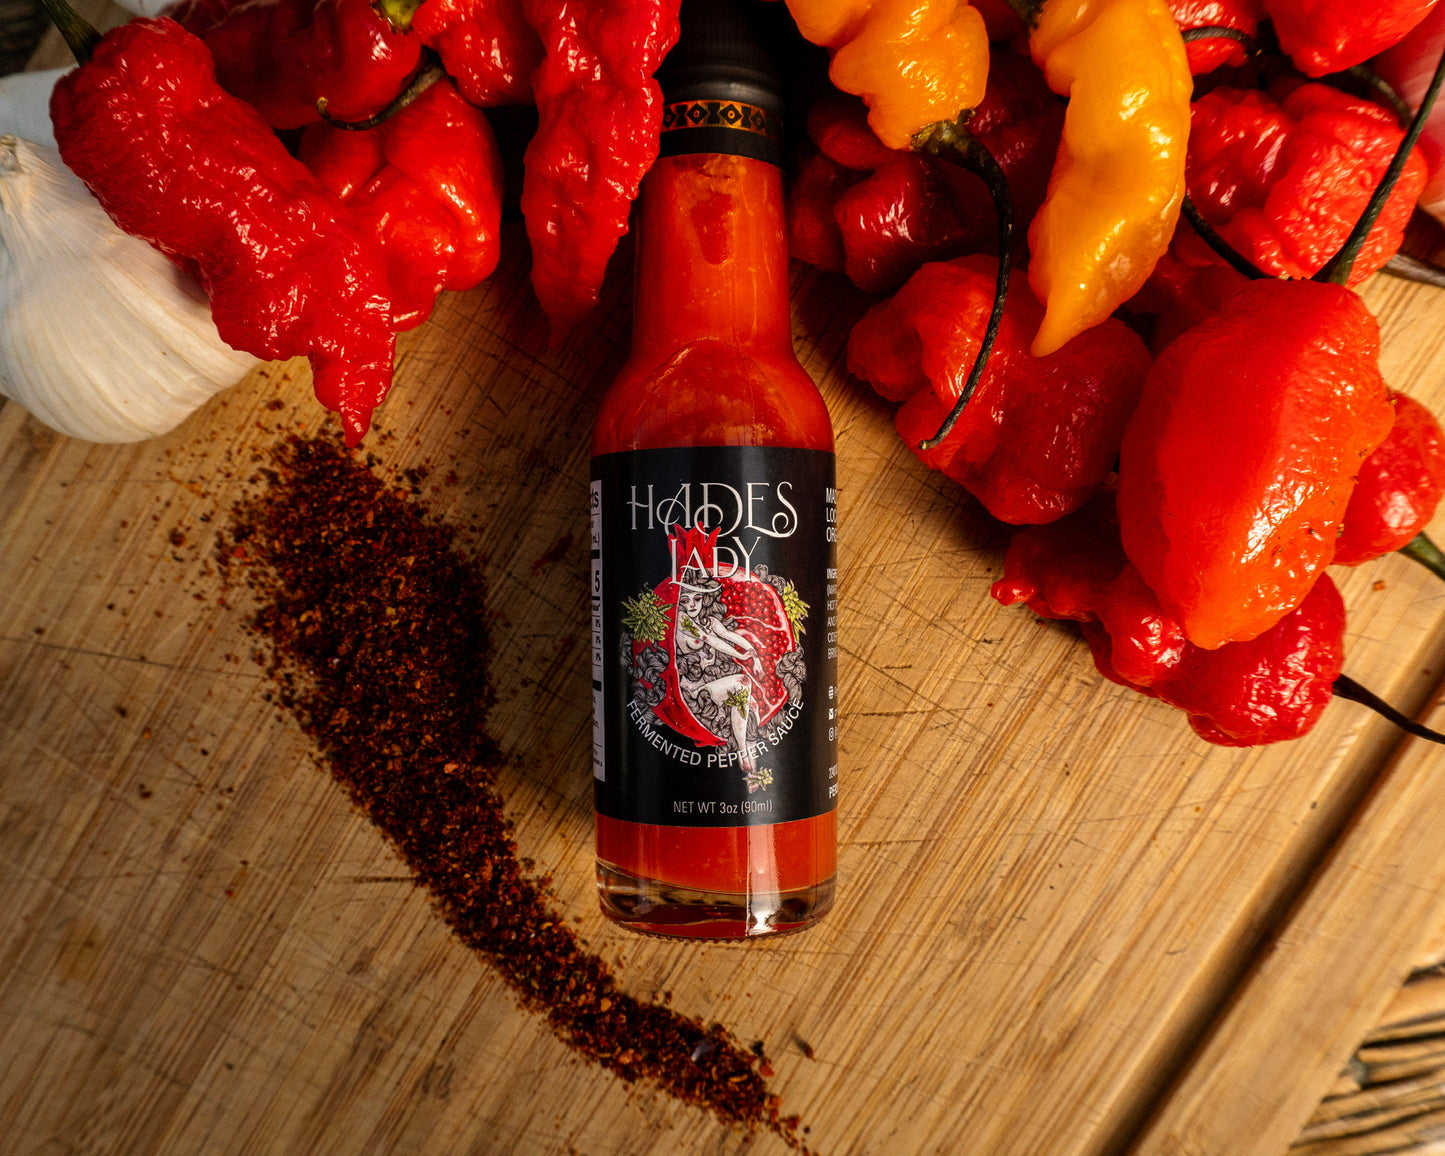 Hades Lady Pepper Sauce